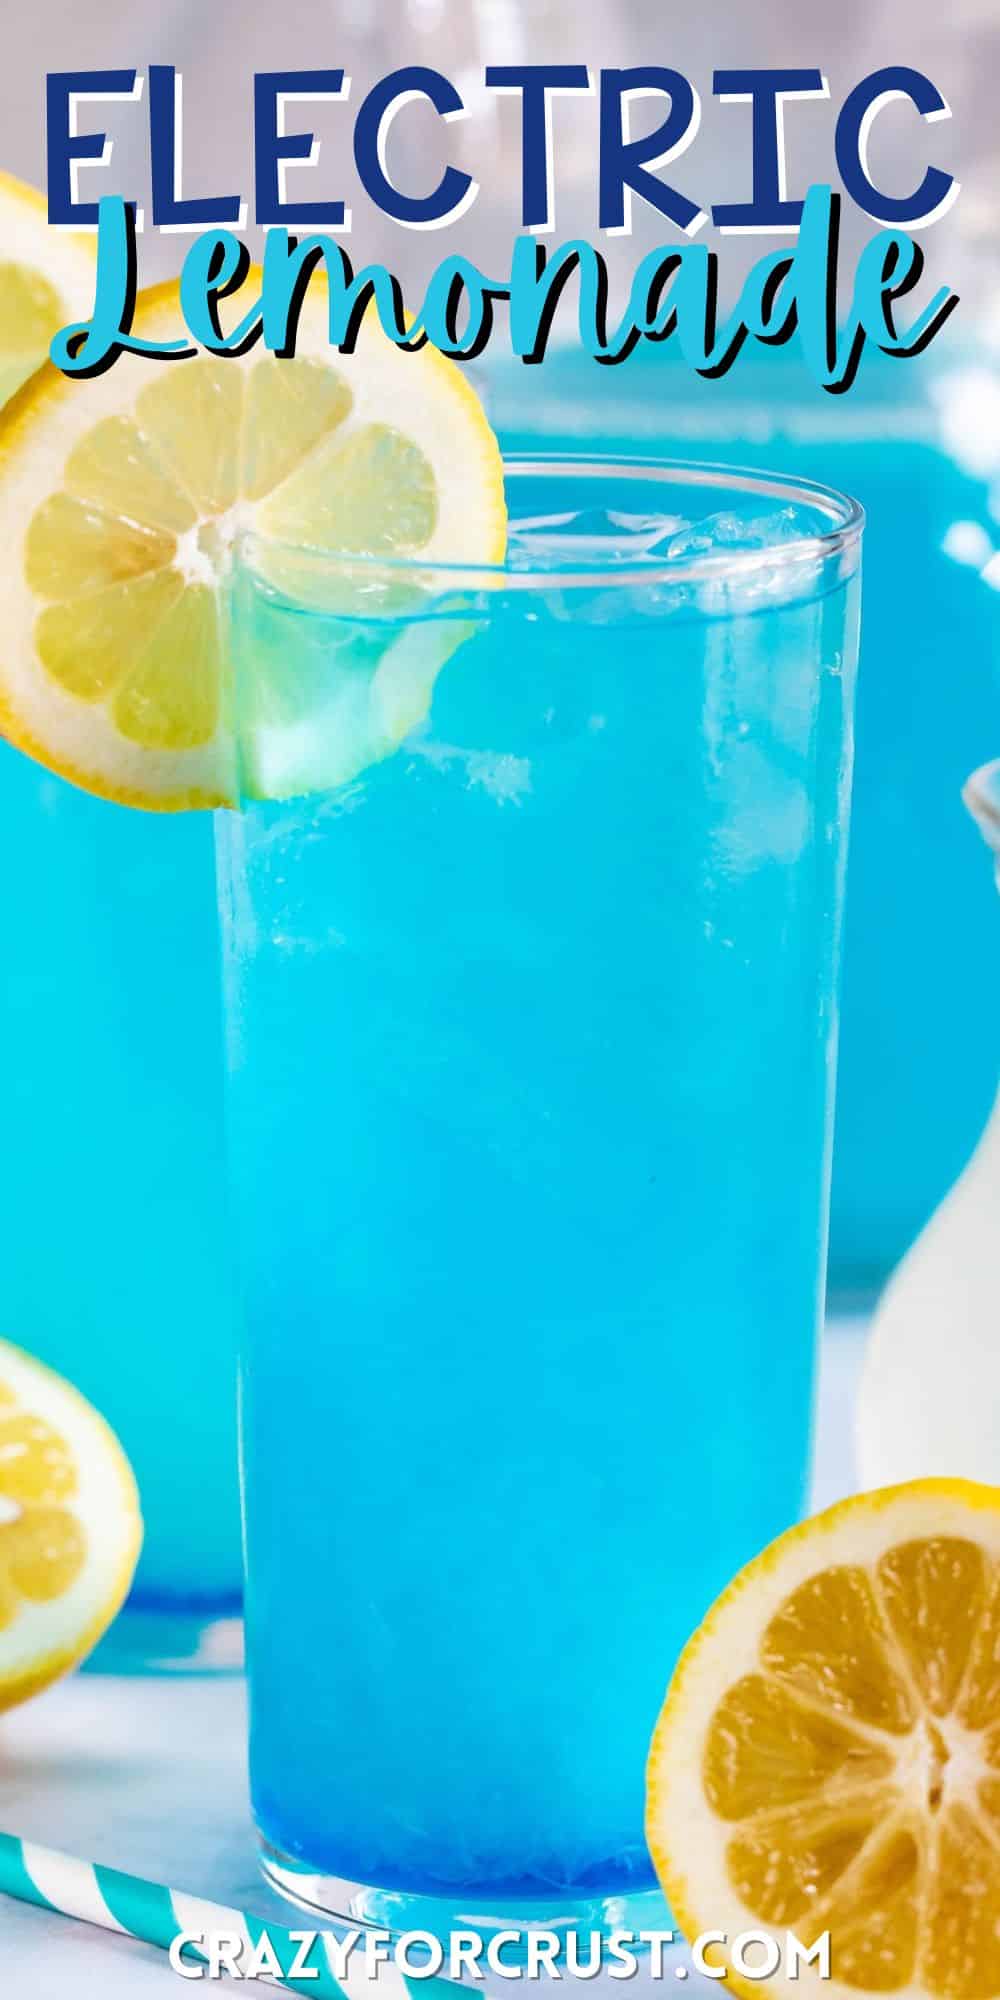 tall clear glass with a bright blue drink inside and a lemon slice on the rim with words on the image.